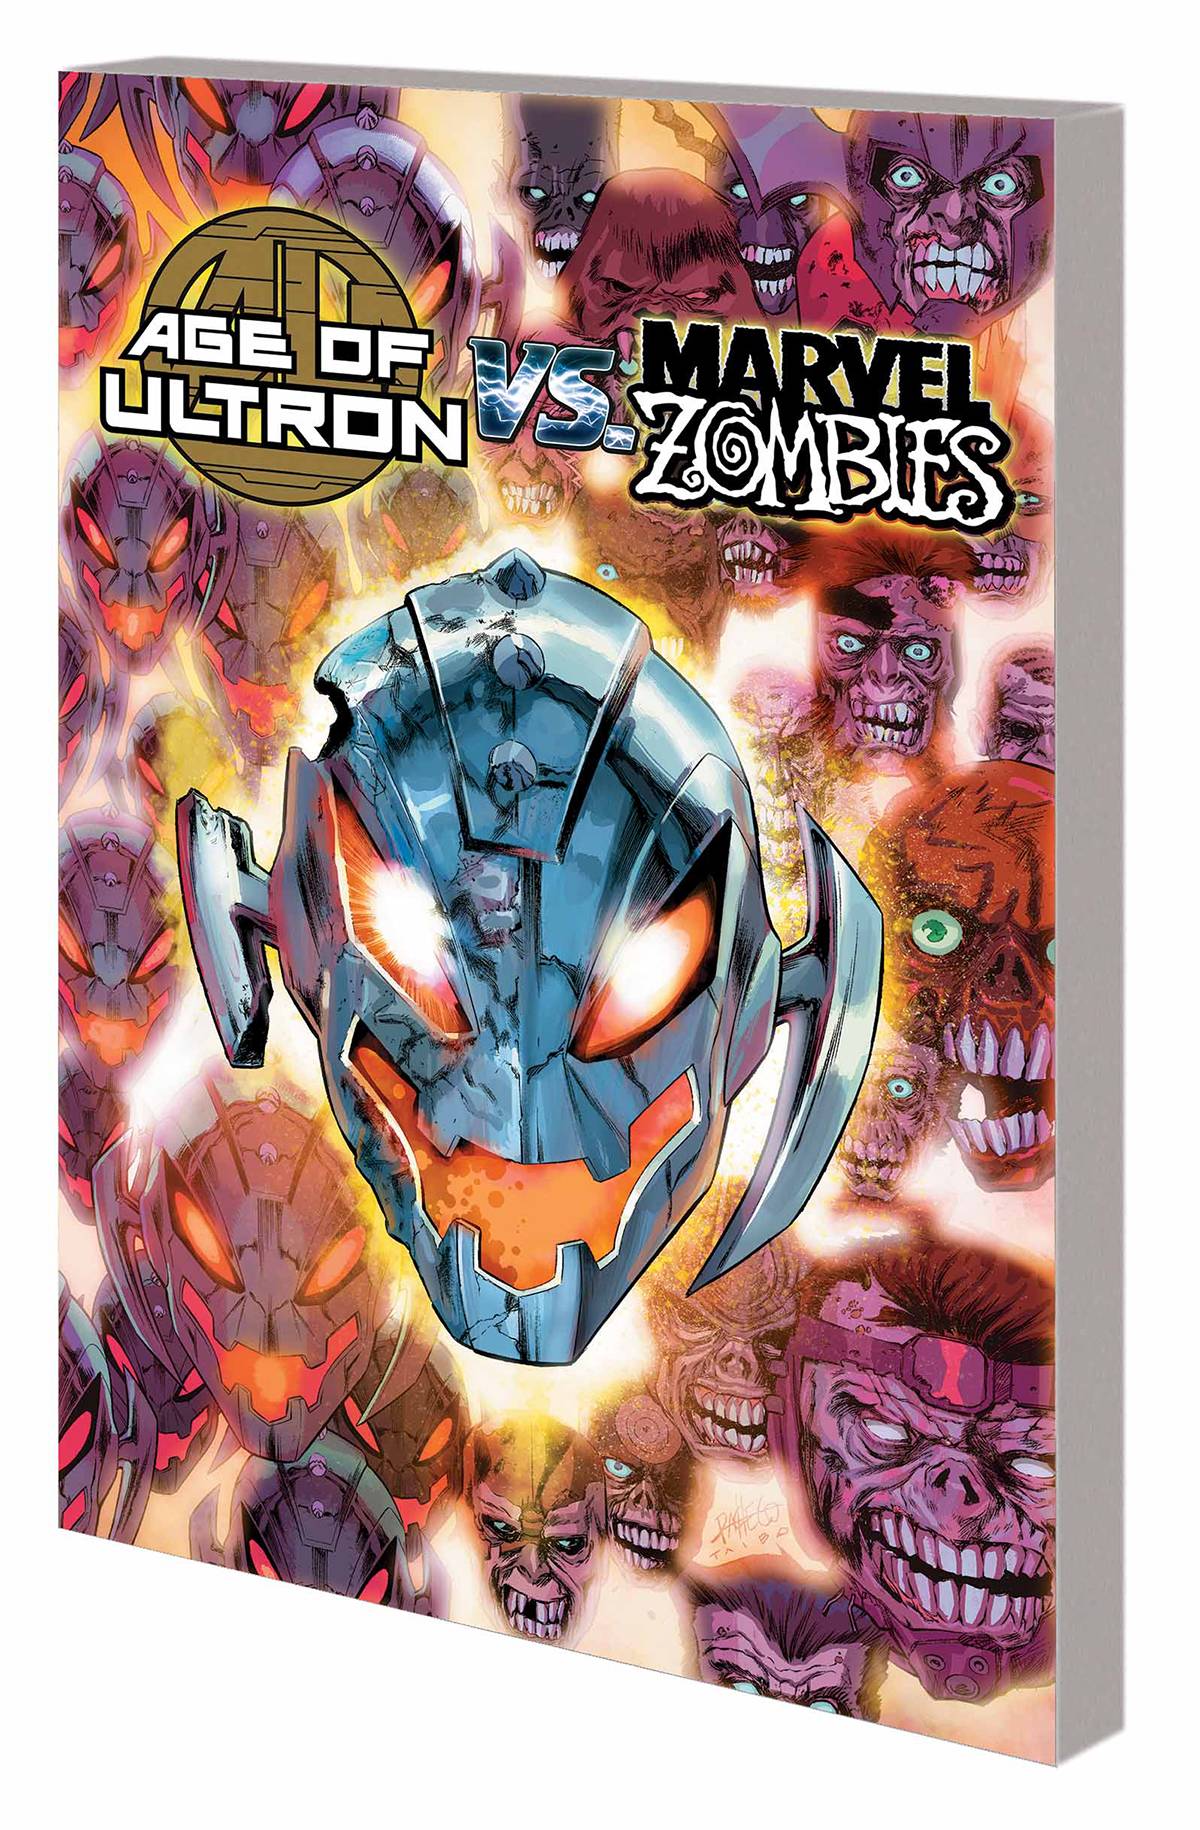 Age of Ultron Vs Marvel Zombies Graphic Novel